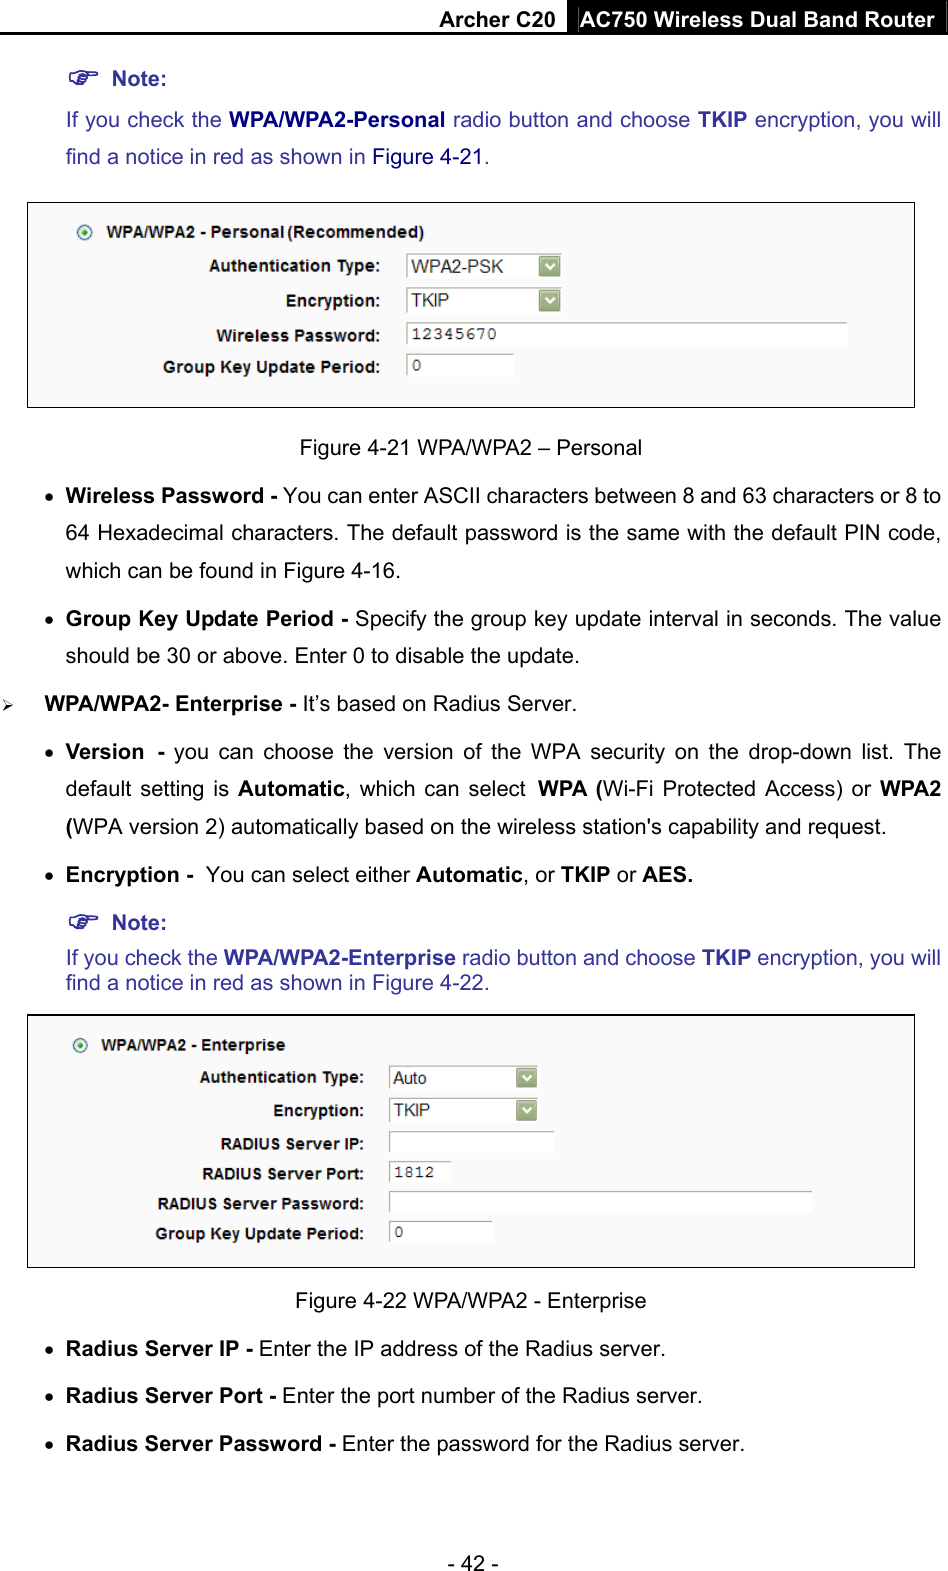 Archer C20 AC750 Wireless Dual Band Router - 42 -  Note:  If you check the WPA/WPA2-Personal radio button and choose TKIP encryption, you will find a notice in red as shown in Figure 4-21.  Figure 4-21 WPA/WPA2 – Personal  Wireless Password - You can enter ASCII characters between 8 and 63 characters or 8 to 64 Hexadecimal characters. The default password is the same with the default PIN code, which can be found in Figure 4-16.  Group Key Update Period - Specify the group key update interval in seconds. The value should be 30 or above. Enter 0 to disable the update.  WPA/WPA2- Enterprise - It’s based on Radius Server.  Version - you can choose the version of the WPA security on the drop-down list. The default setting is Automatic, which can select WPA (Wi-Fi Protected Access) or WPA2 (WPA version 2) automatically based on the wireless station&apos;s capability and request.  Encryption - You can select either Automatic, or TKIP or AES.  Note: If you check the WPA/WPA2-Enterprise radio button and choose TKIP encryption, you will find a notice in red as shown in Figure 4-22.  Figure 4-22 WPA/WPA2 - Enterprise  Radius Server IP - Enter the IP address of the Radius server.  Radius Server Port - Enter the port number of the Radius server.  Radius Server Password - Enter the password for the Radius server. 